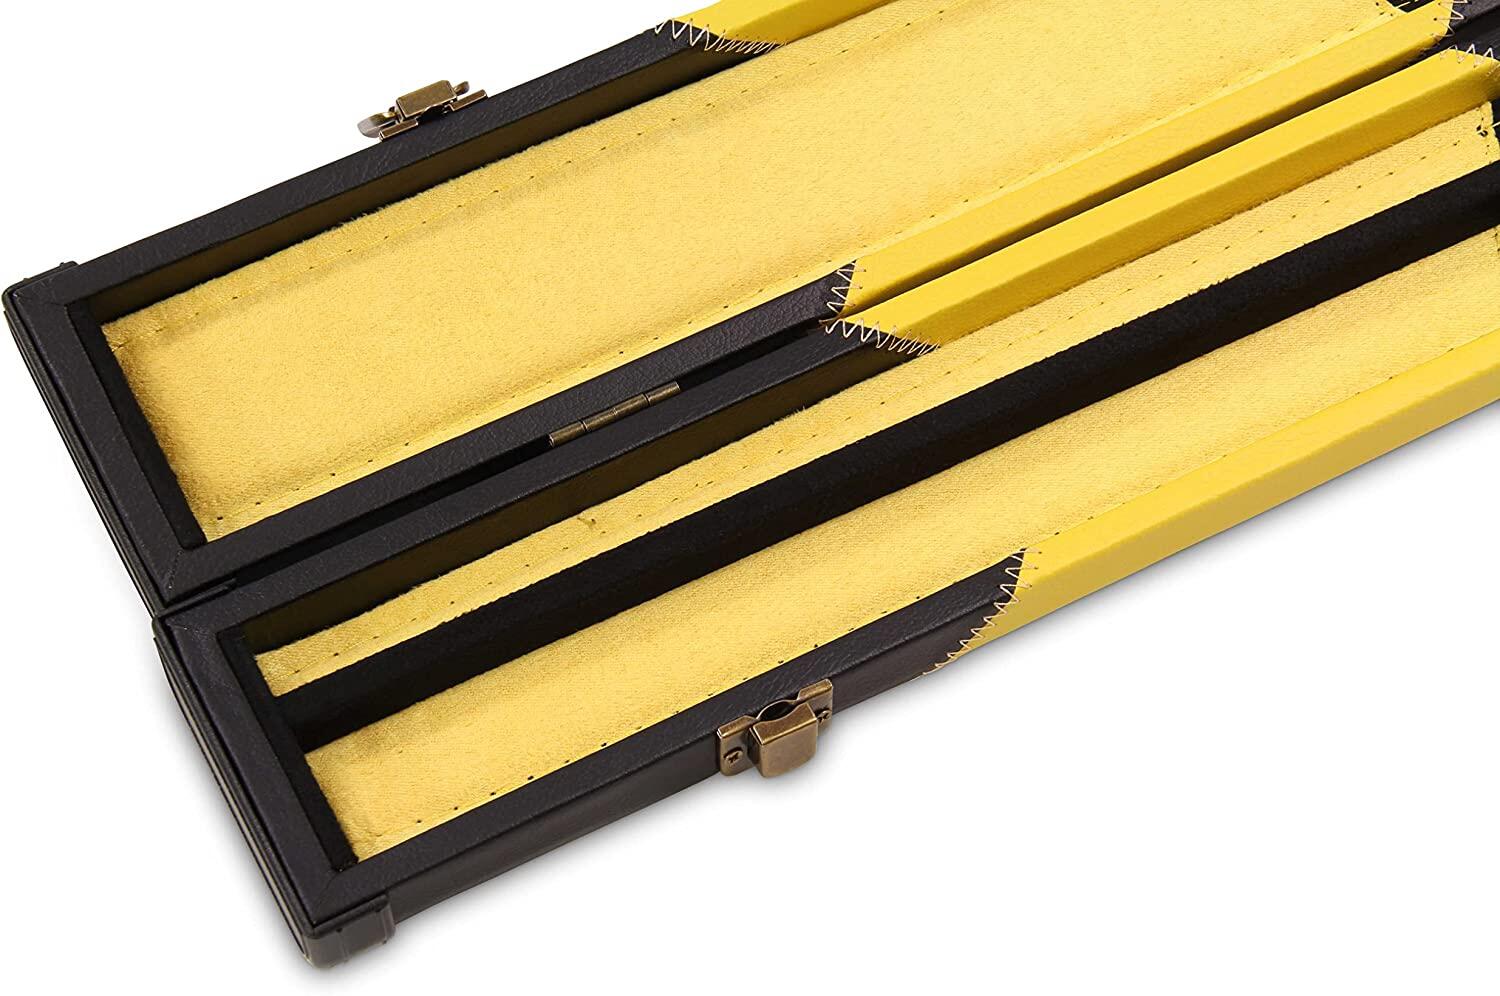 BAIZE MASTER YELLOW ARROW Deluxe 2pc Snooker Pool Cue Case with Matching Coloure 7/7